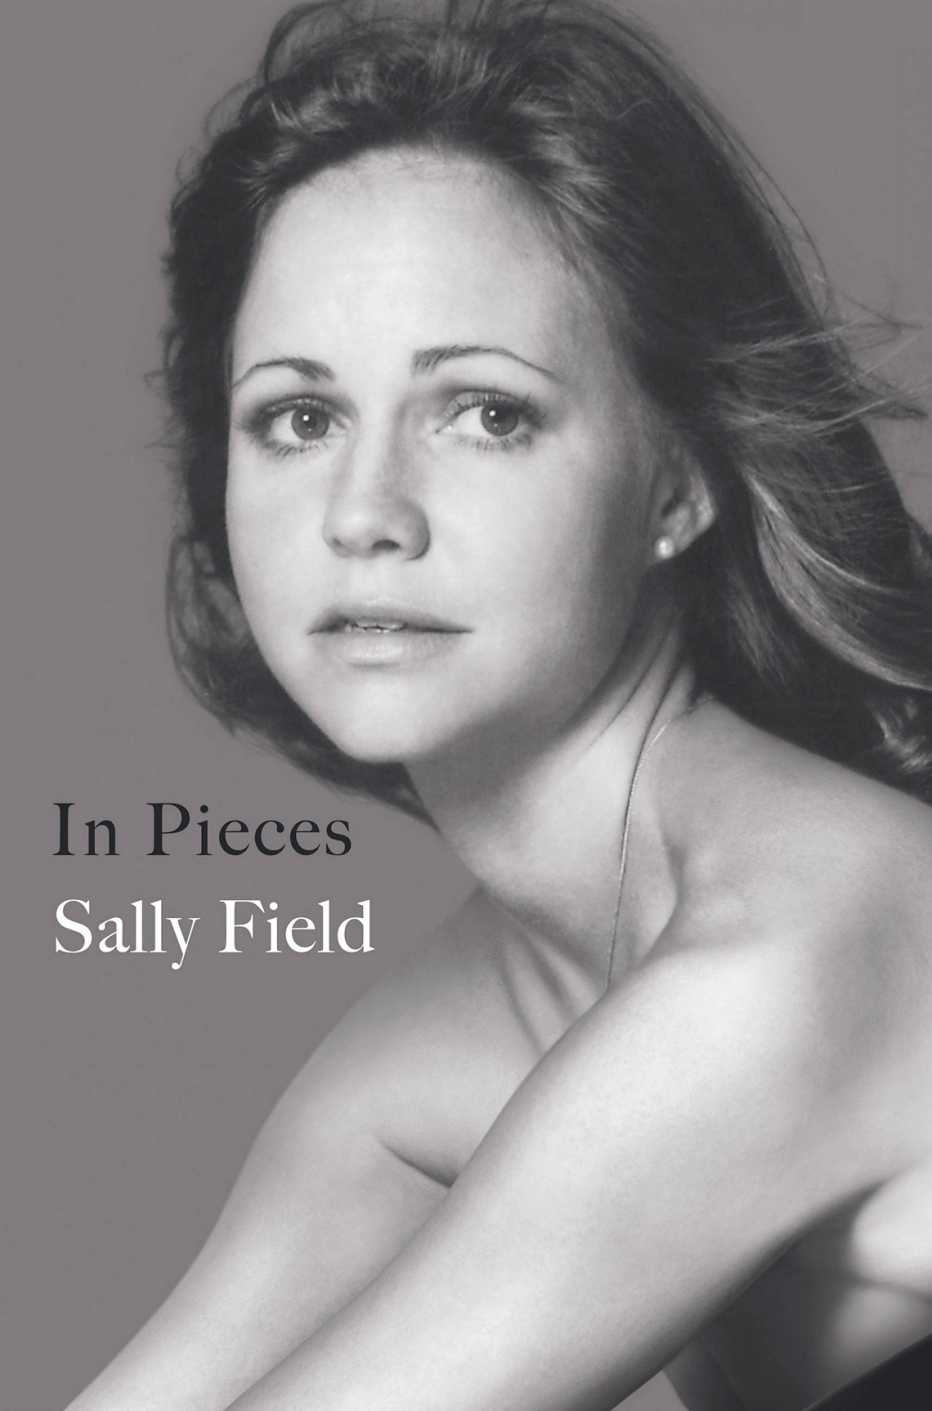 Sally Field, "In Pieces" book cover